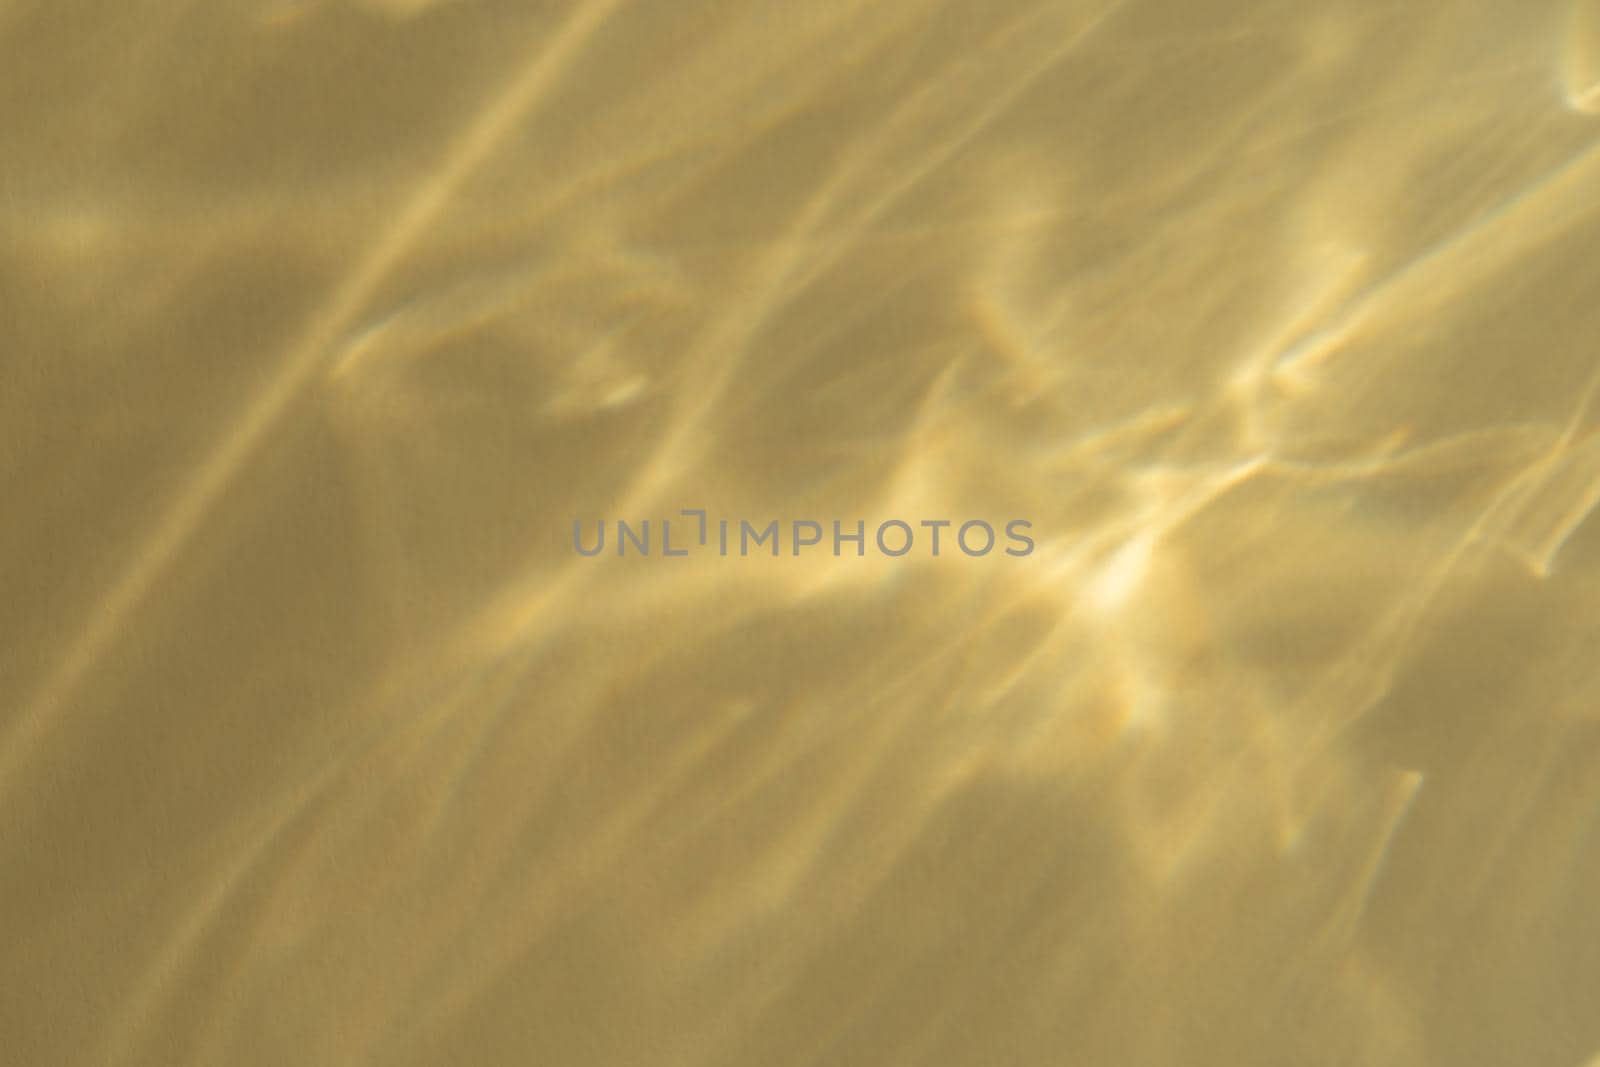 Caustic effect light refraction on yellow wall overlay photo mockup, blurred sun rays refracting through glass prism with shadow. Abstract natural light refraction silhouette on water surface mock up.